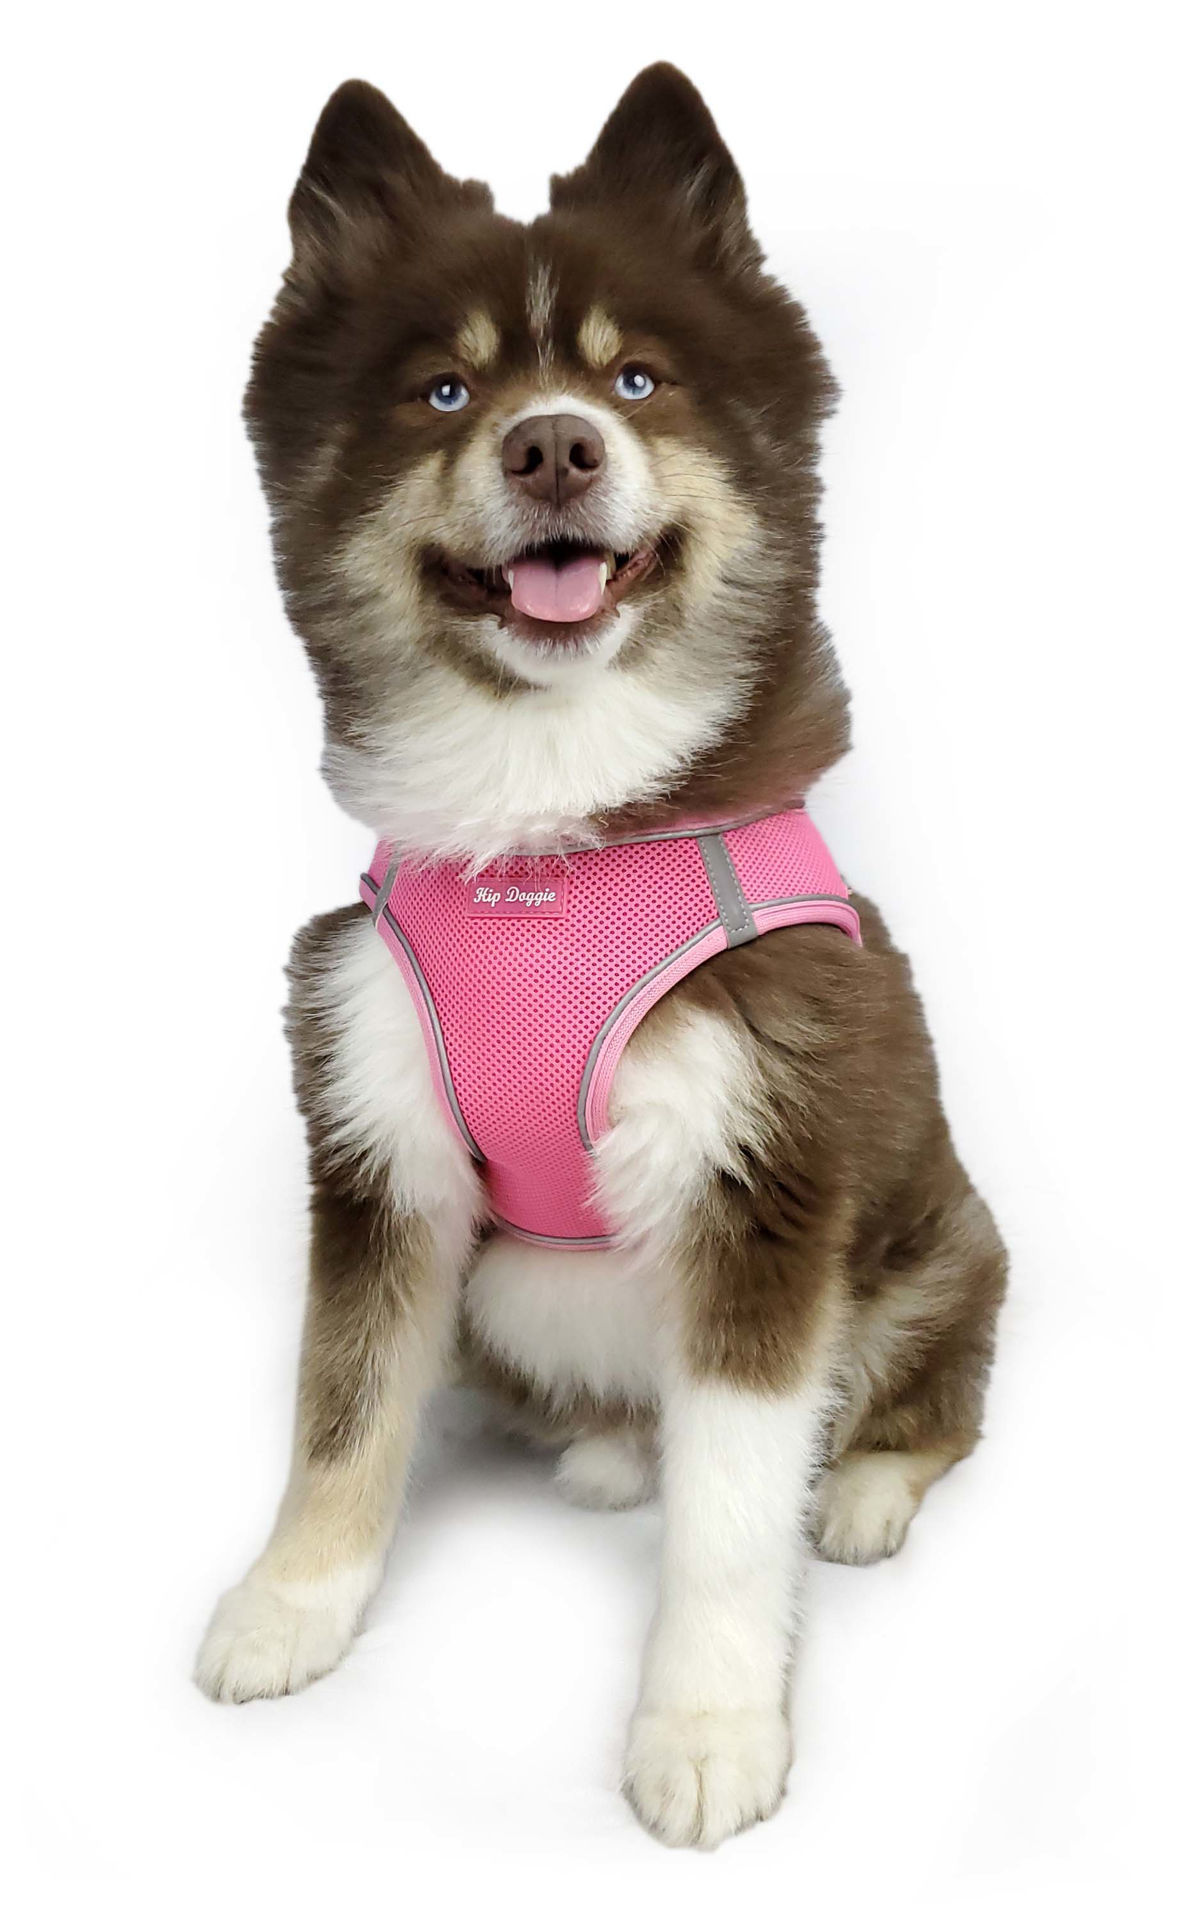 Picture of EZ Step-In Harness Vest - Pink